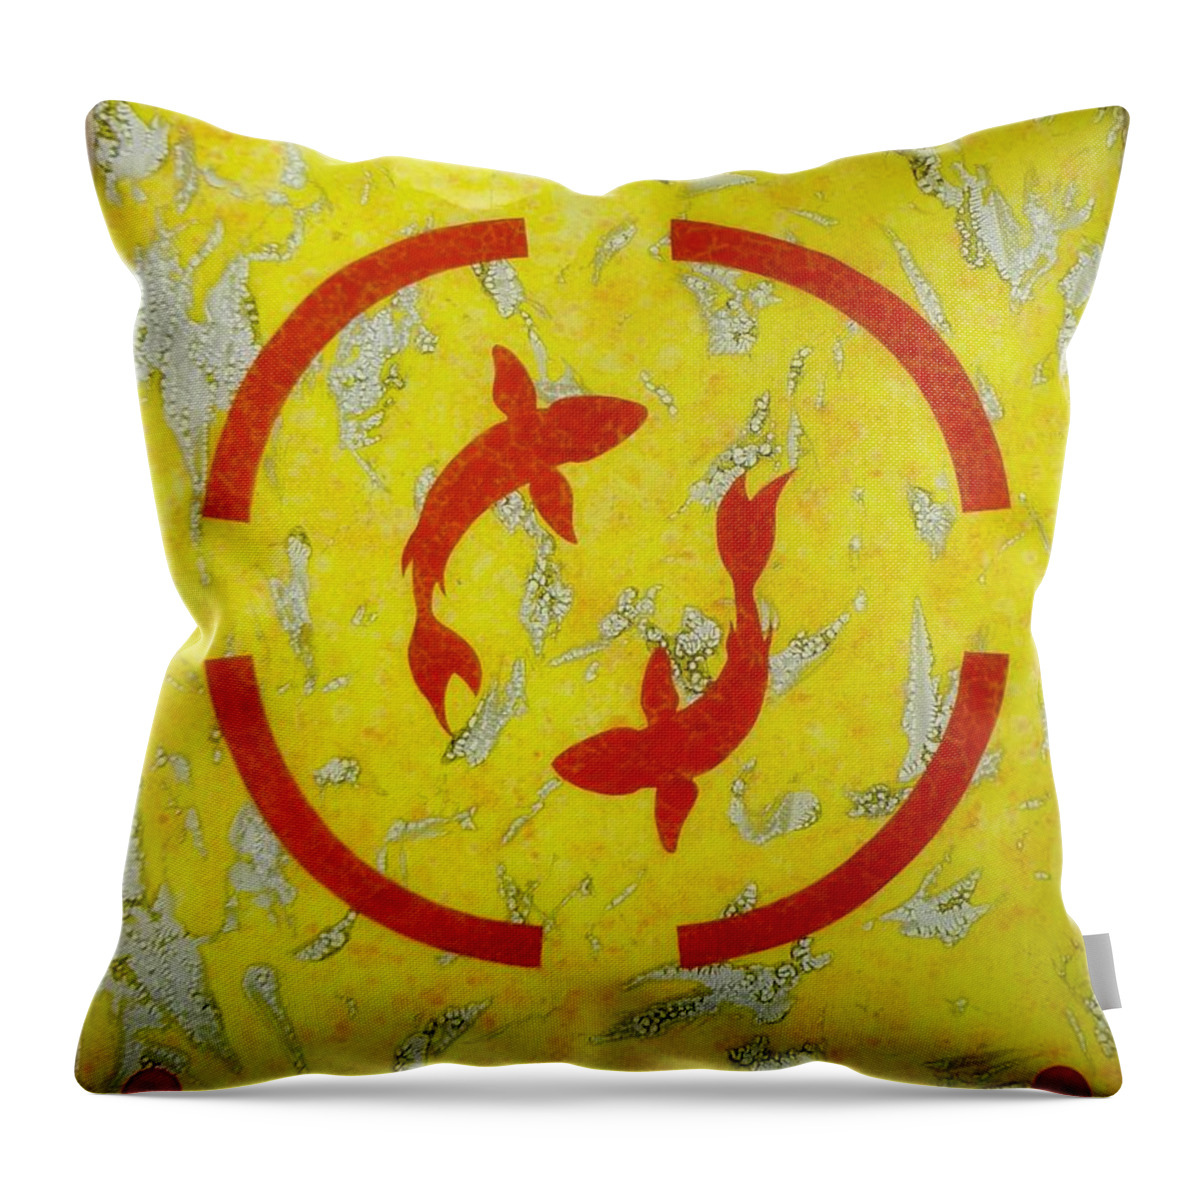 Yellow Throw Pillow featuring the glass art The Fishes by Christopher Schranck